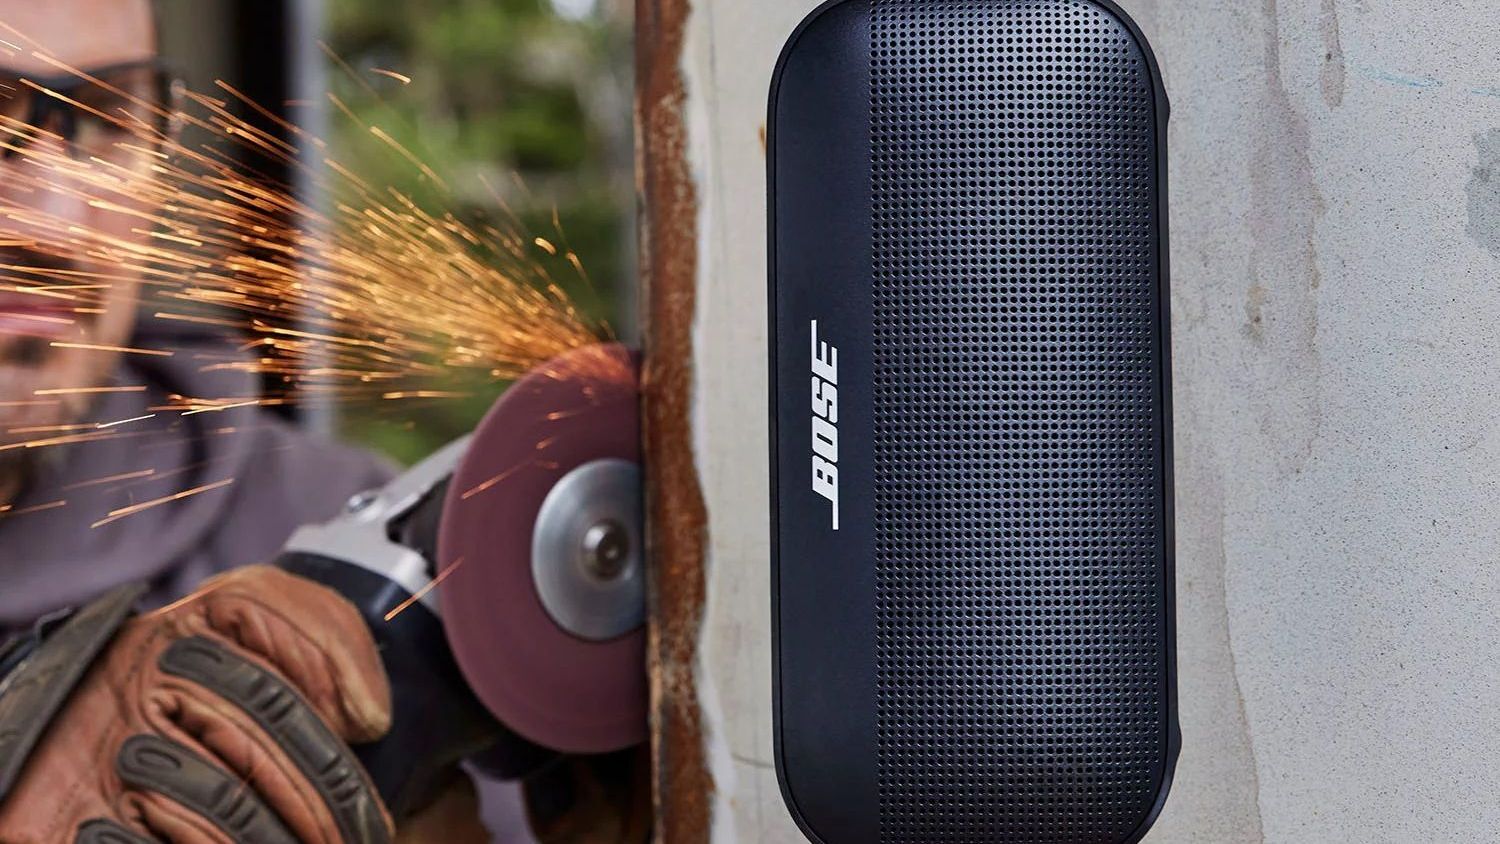 The best budget Bluetooth speaker you can find - our top 5 list